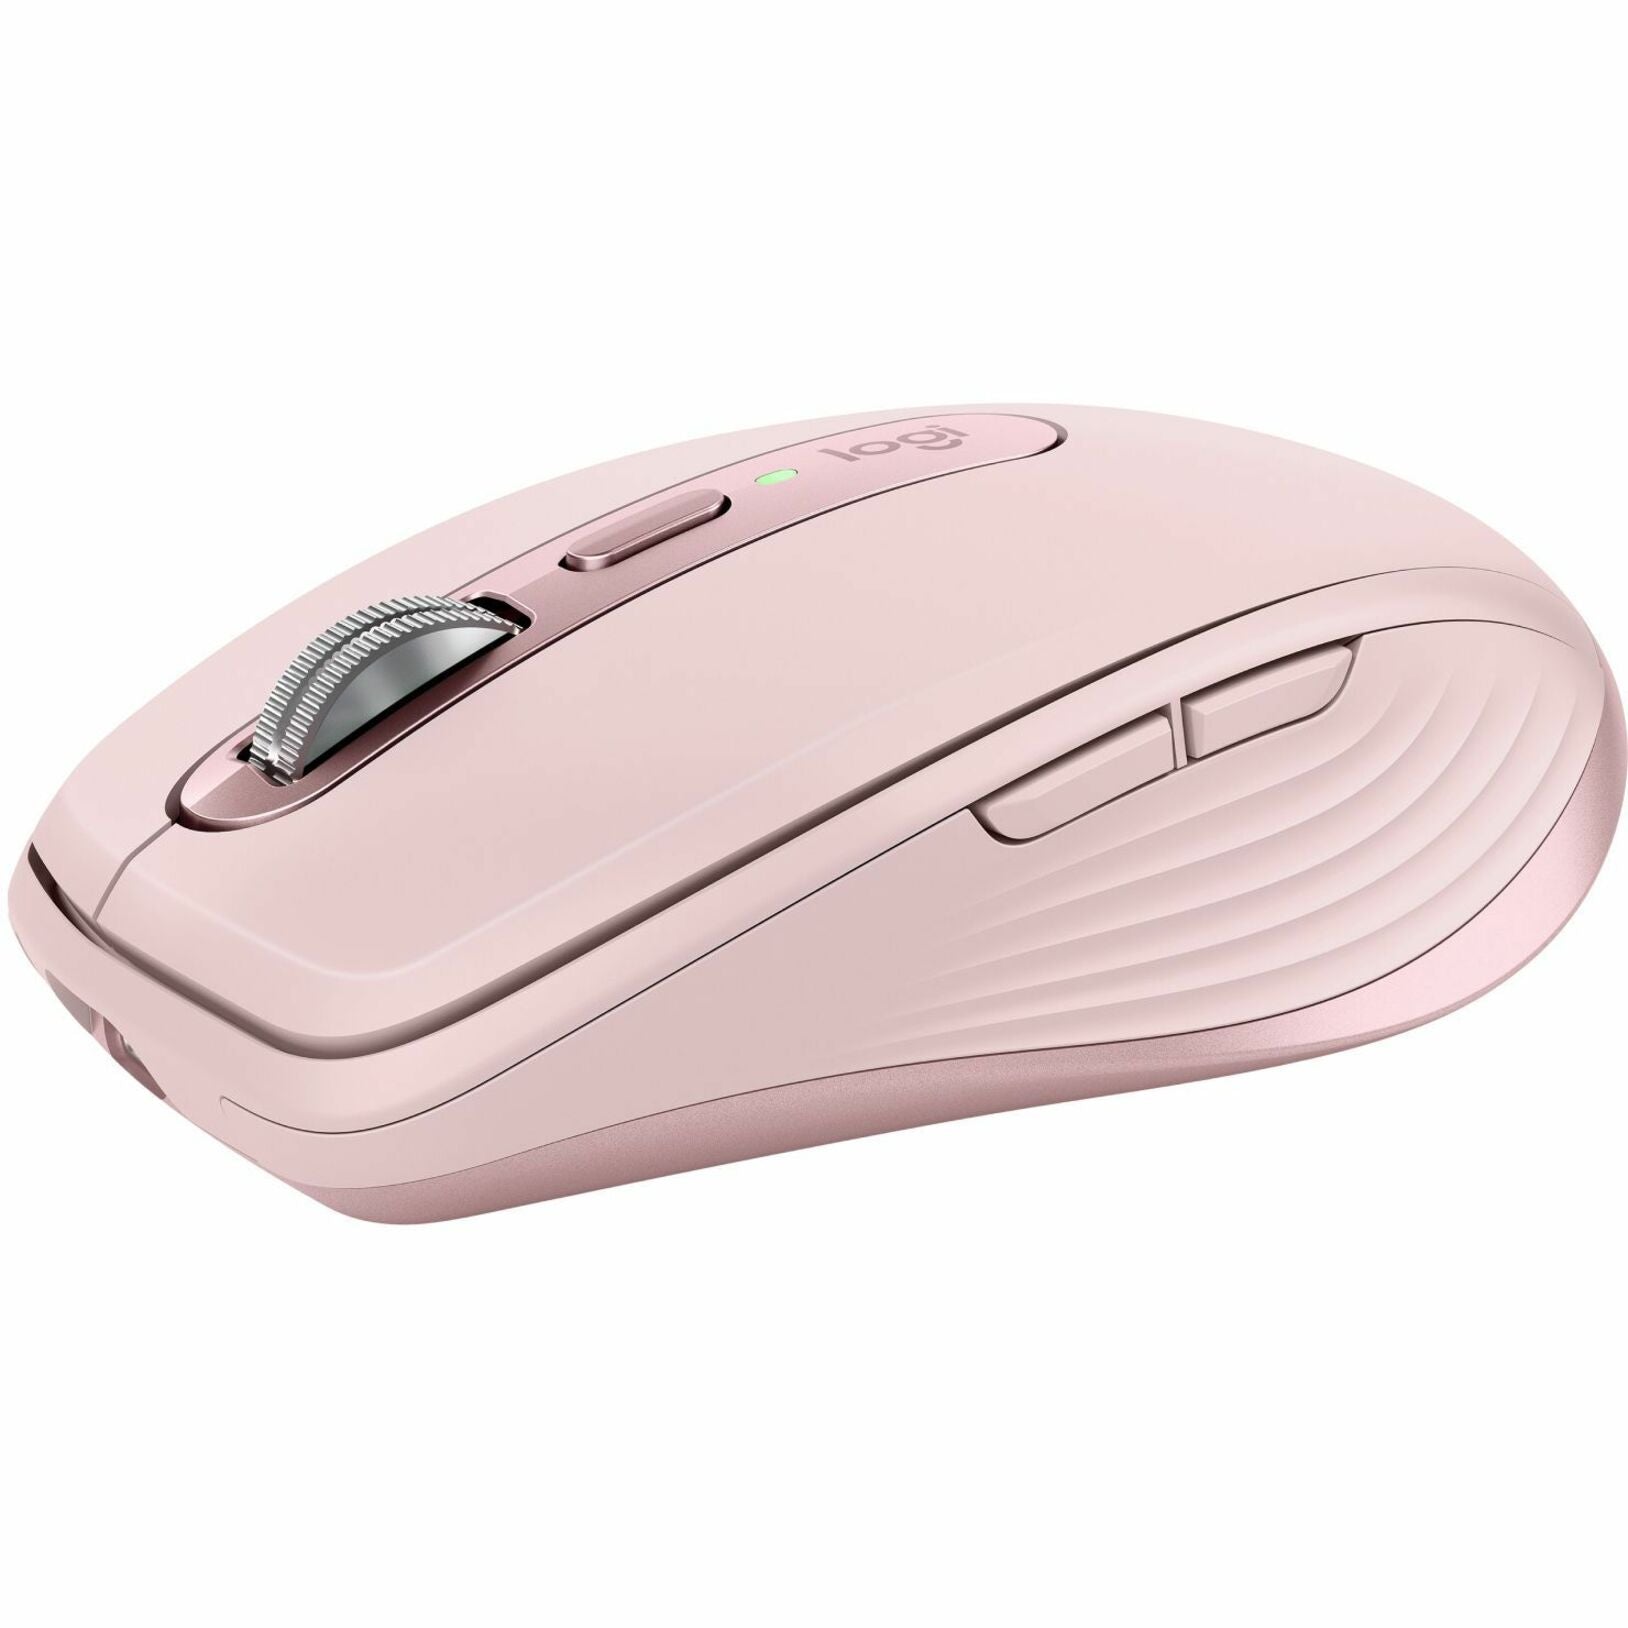 Logitech 910-006927 Mouse, Rose, Environmentally Friendly, RoHS, WEEE